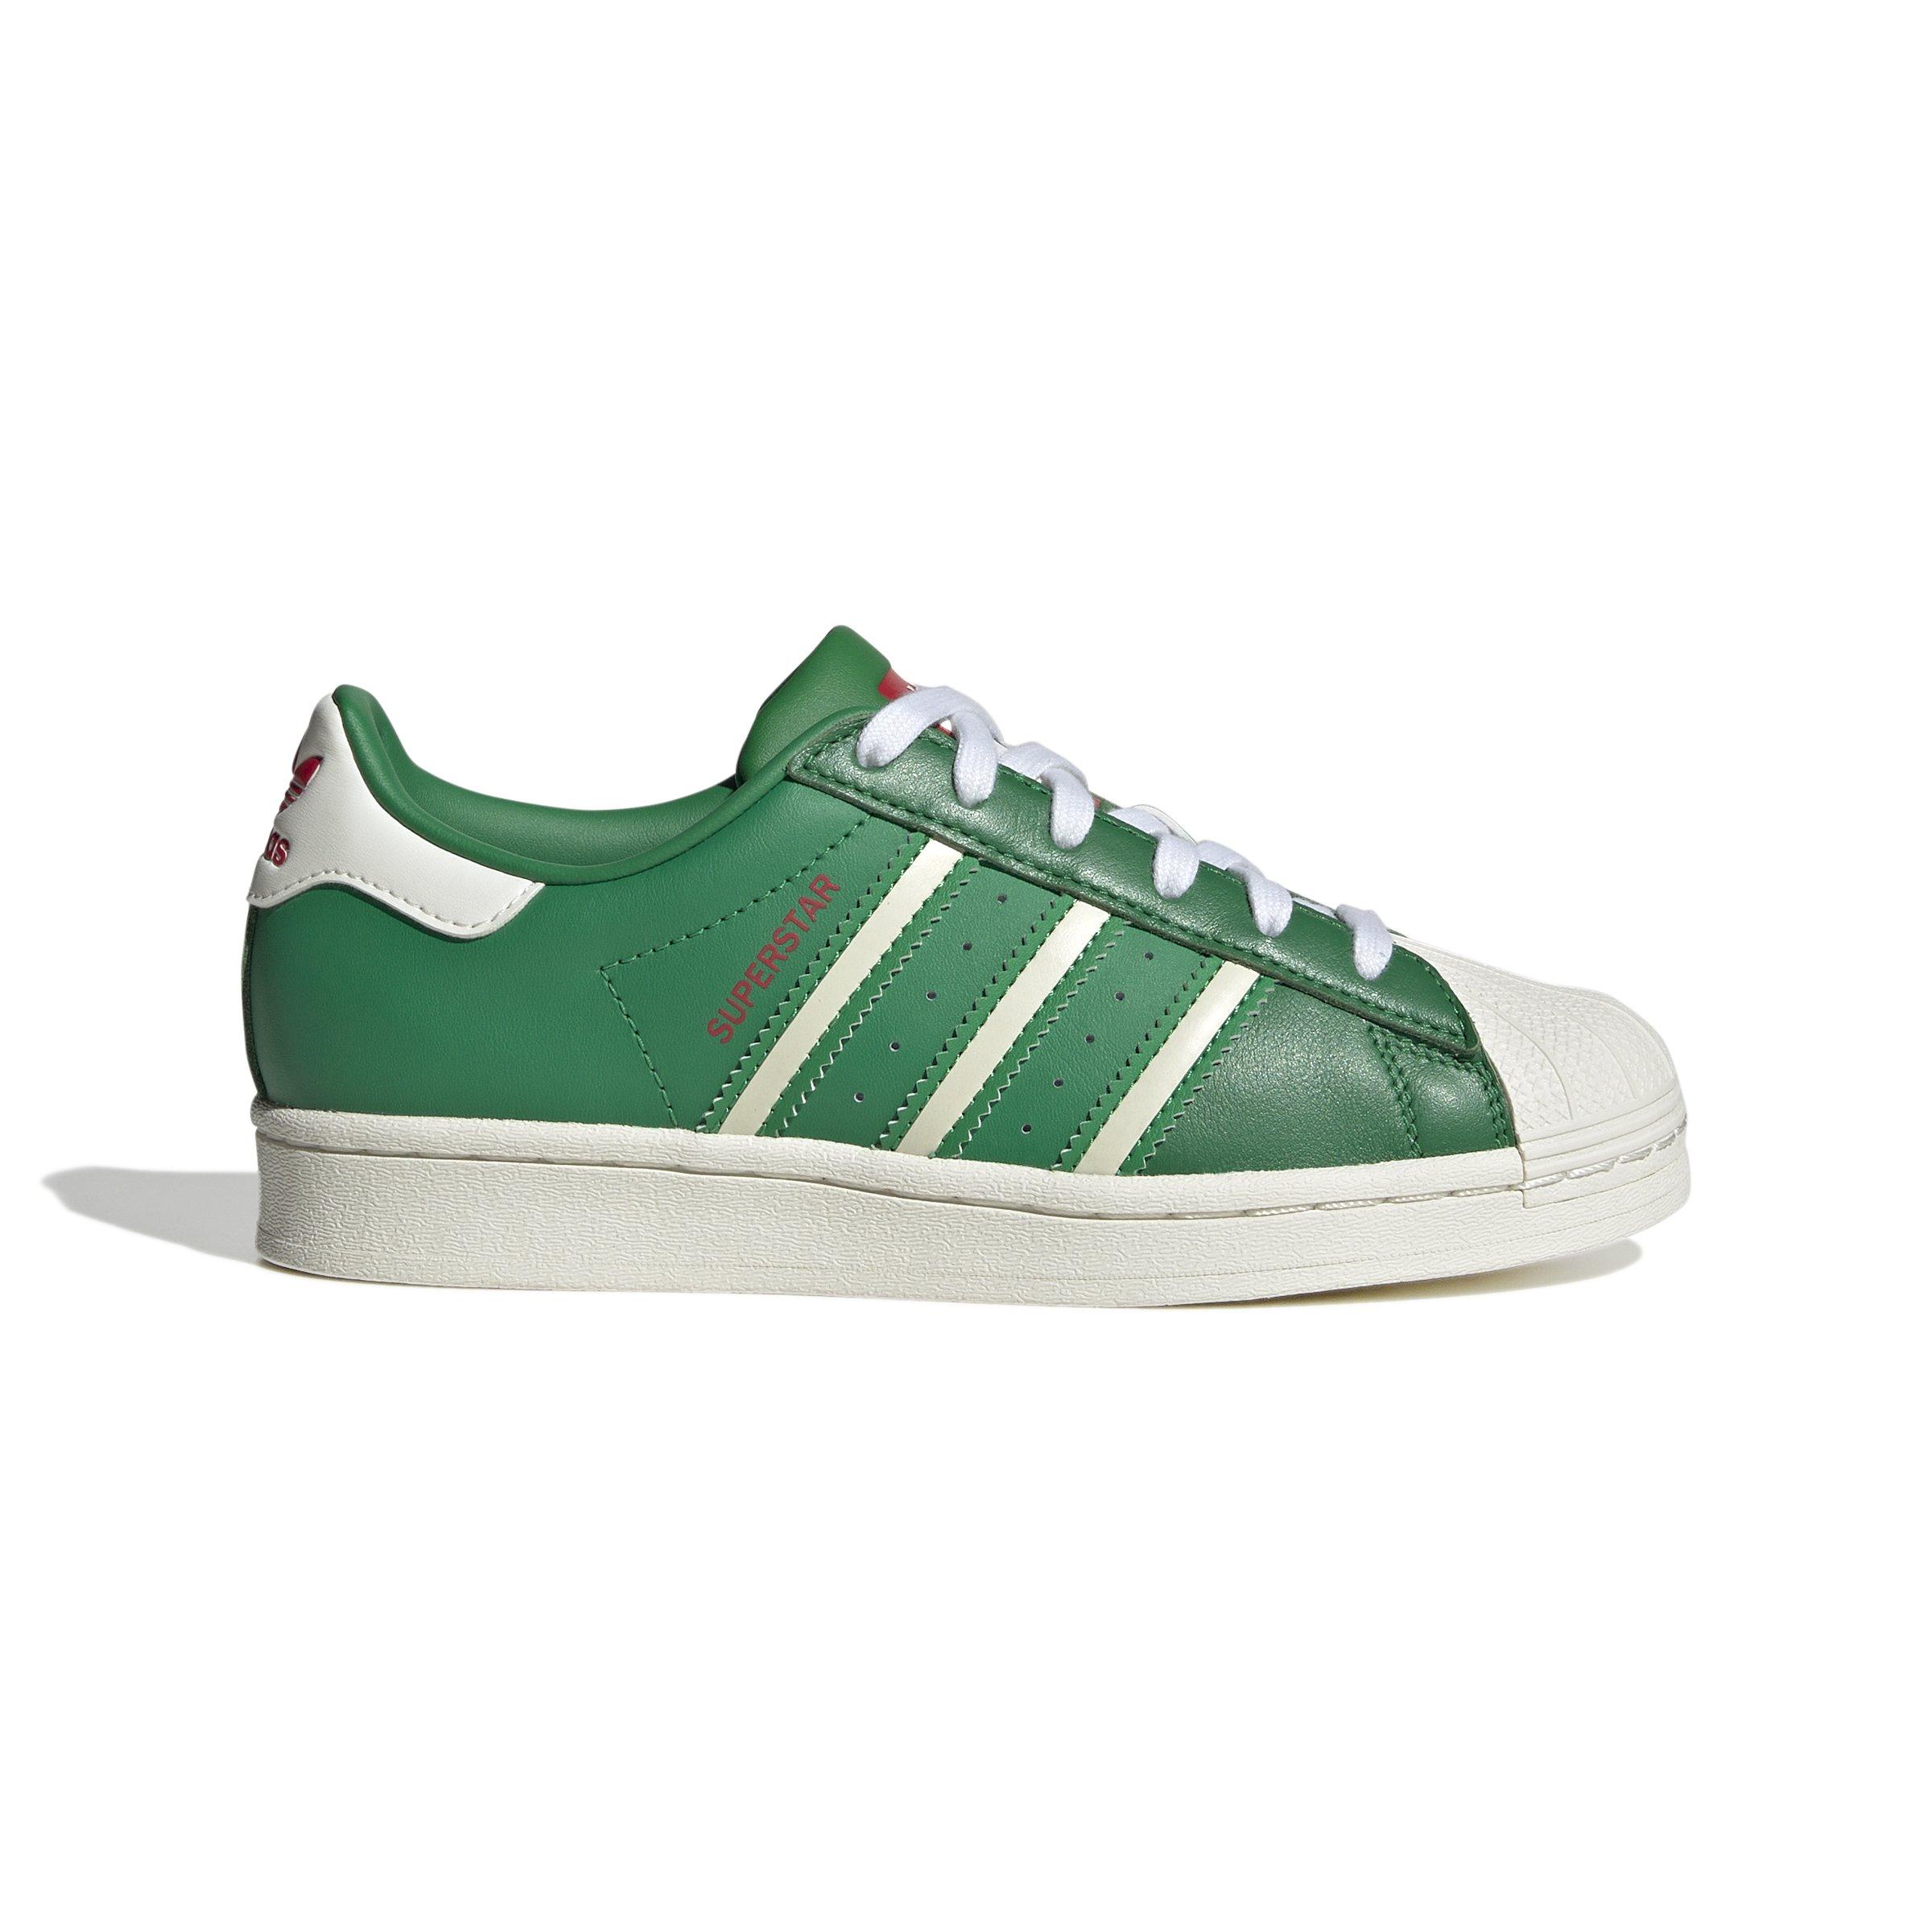 adidas Superstar white/green, Stylenumber is 809903 For mor…